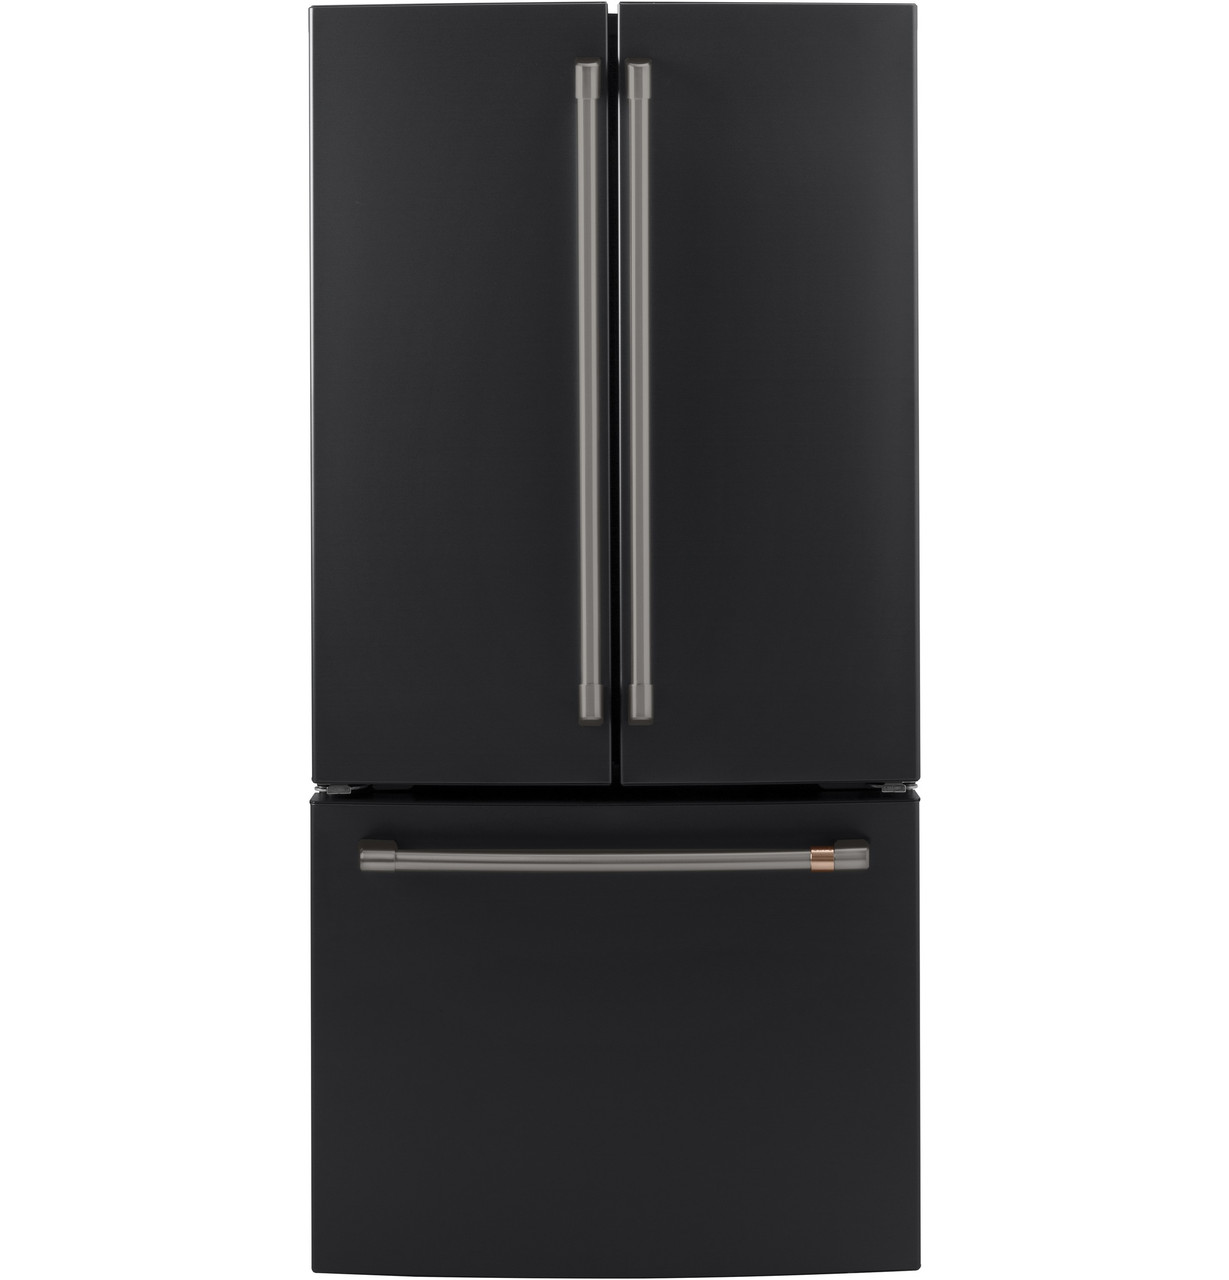 Samsung refrigerator shows OF OF, O FF, or scrolling bars